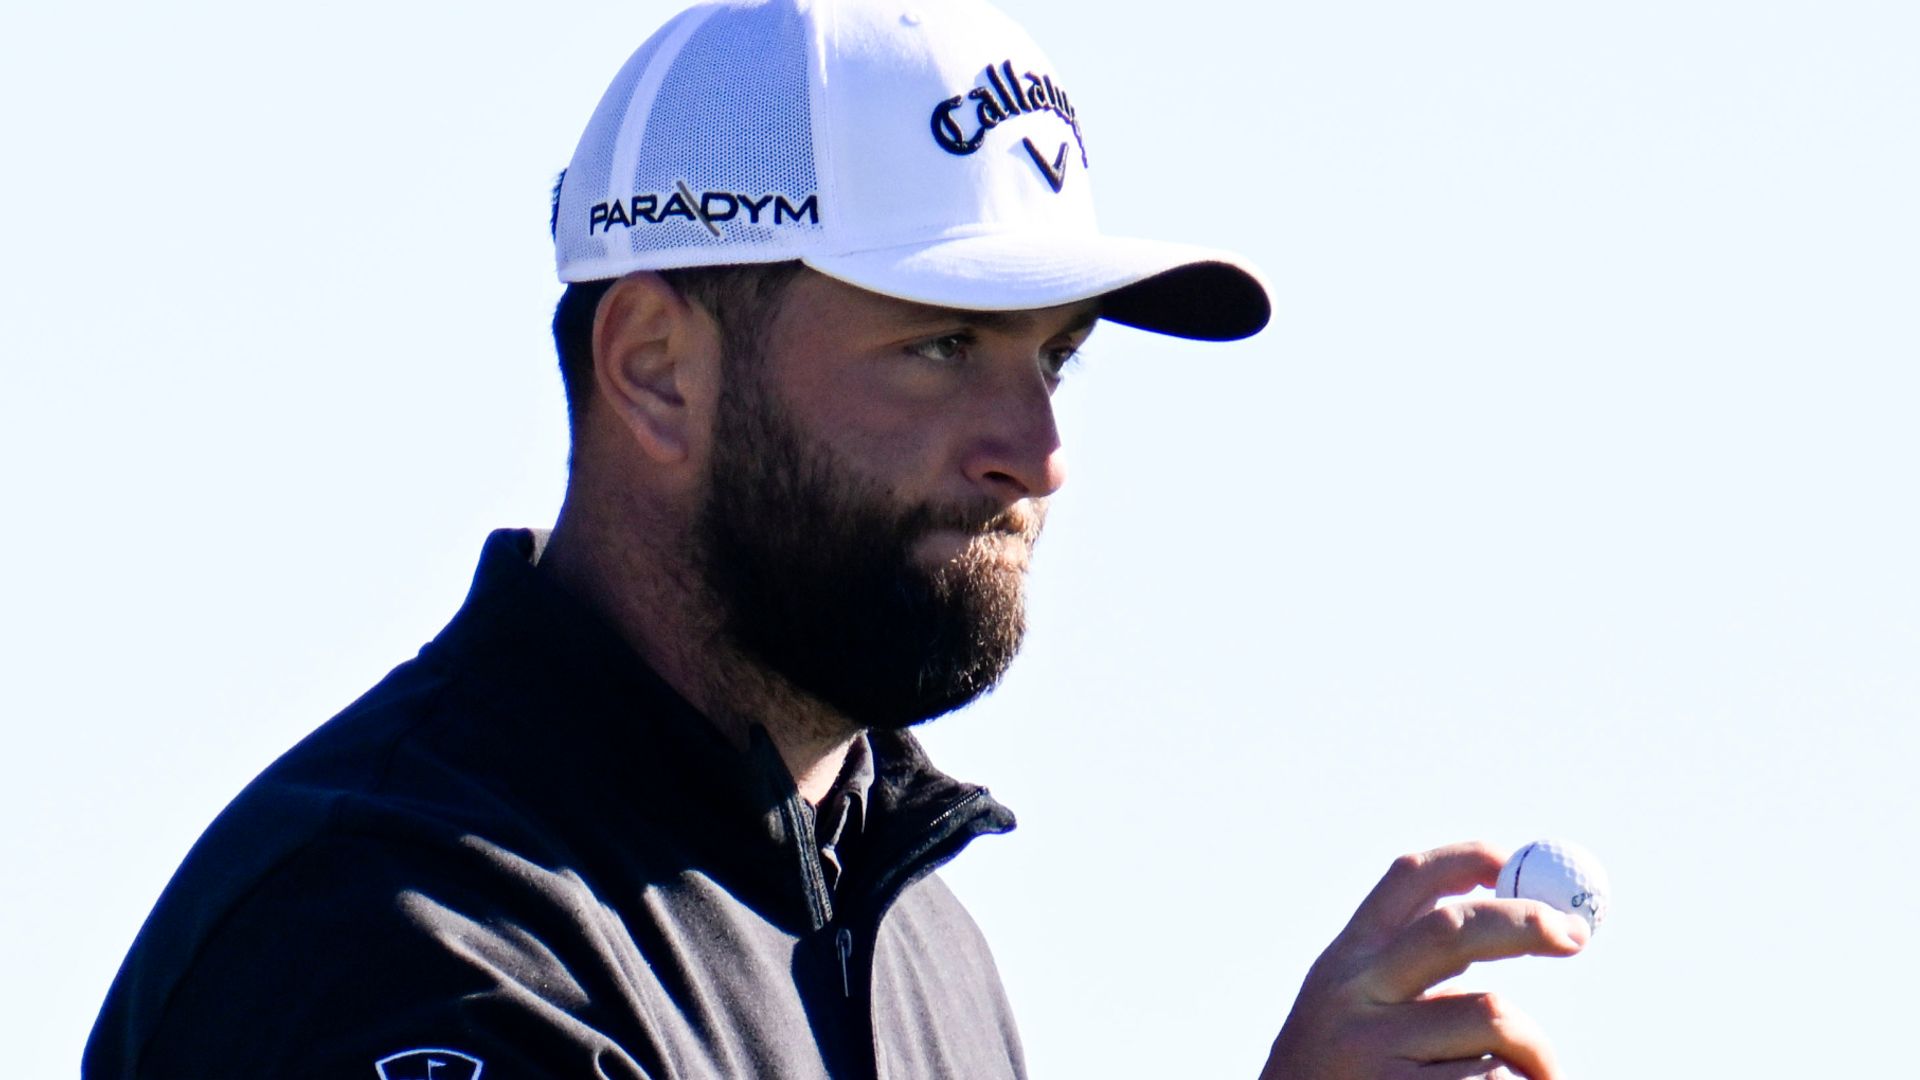 Ryder ahead as Rahm bounces back at Torrey Pines